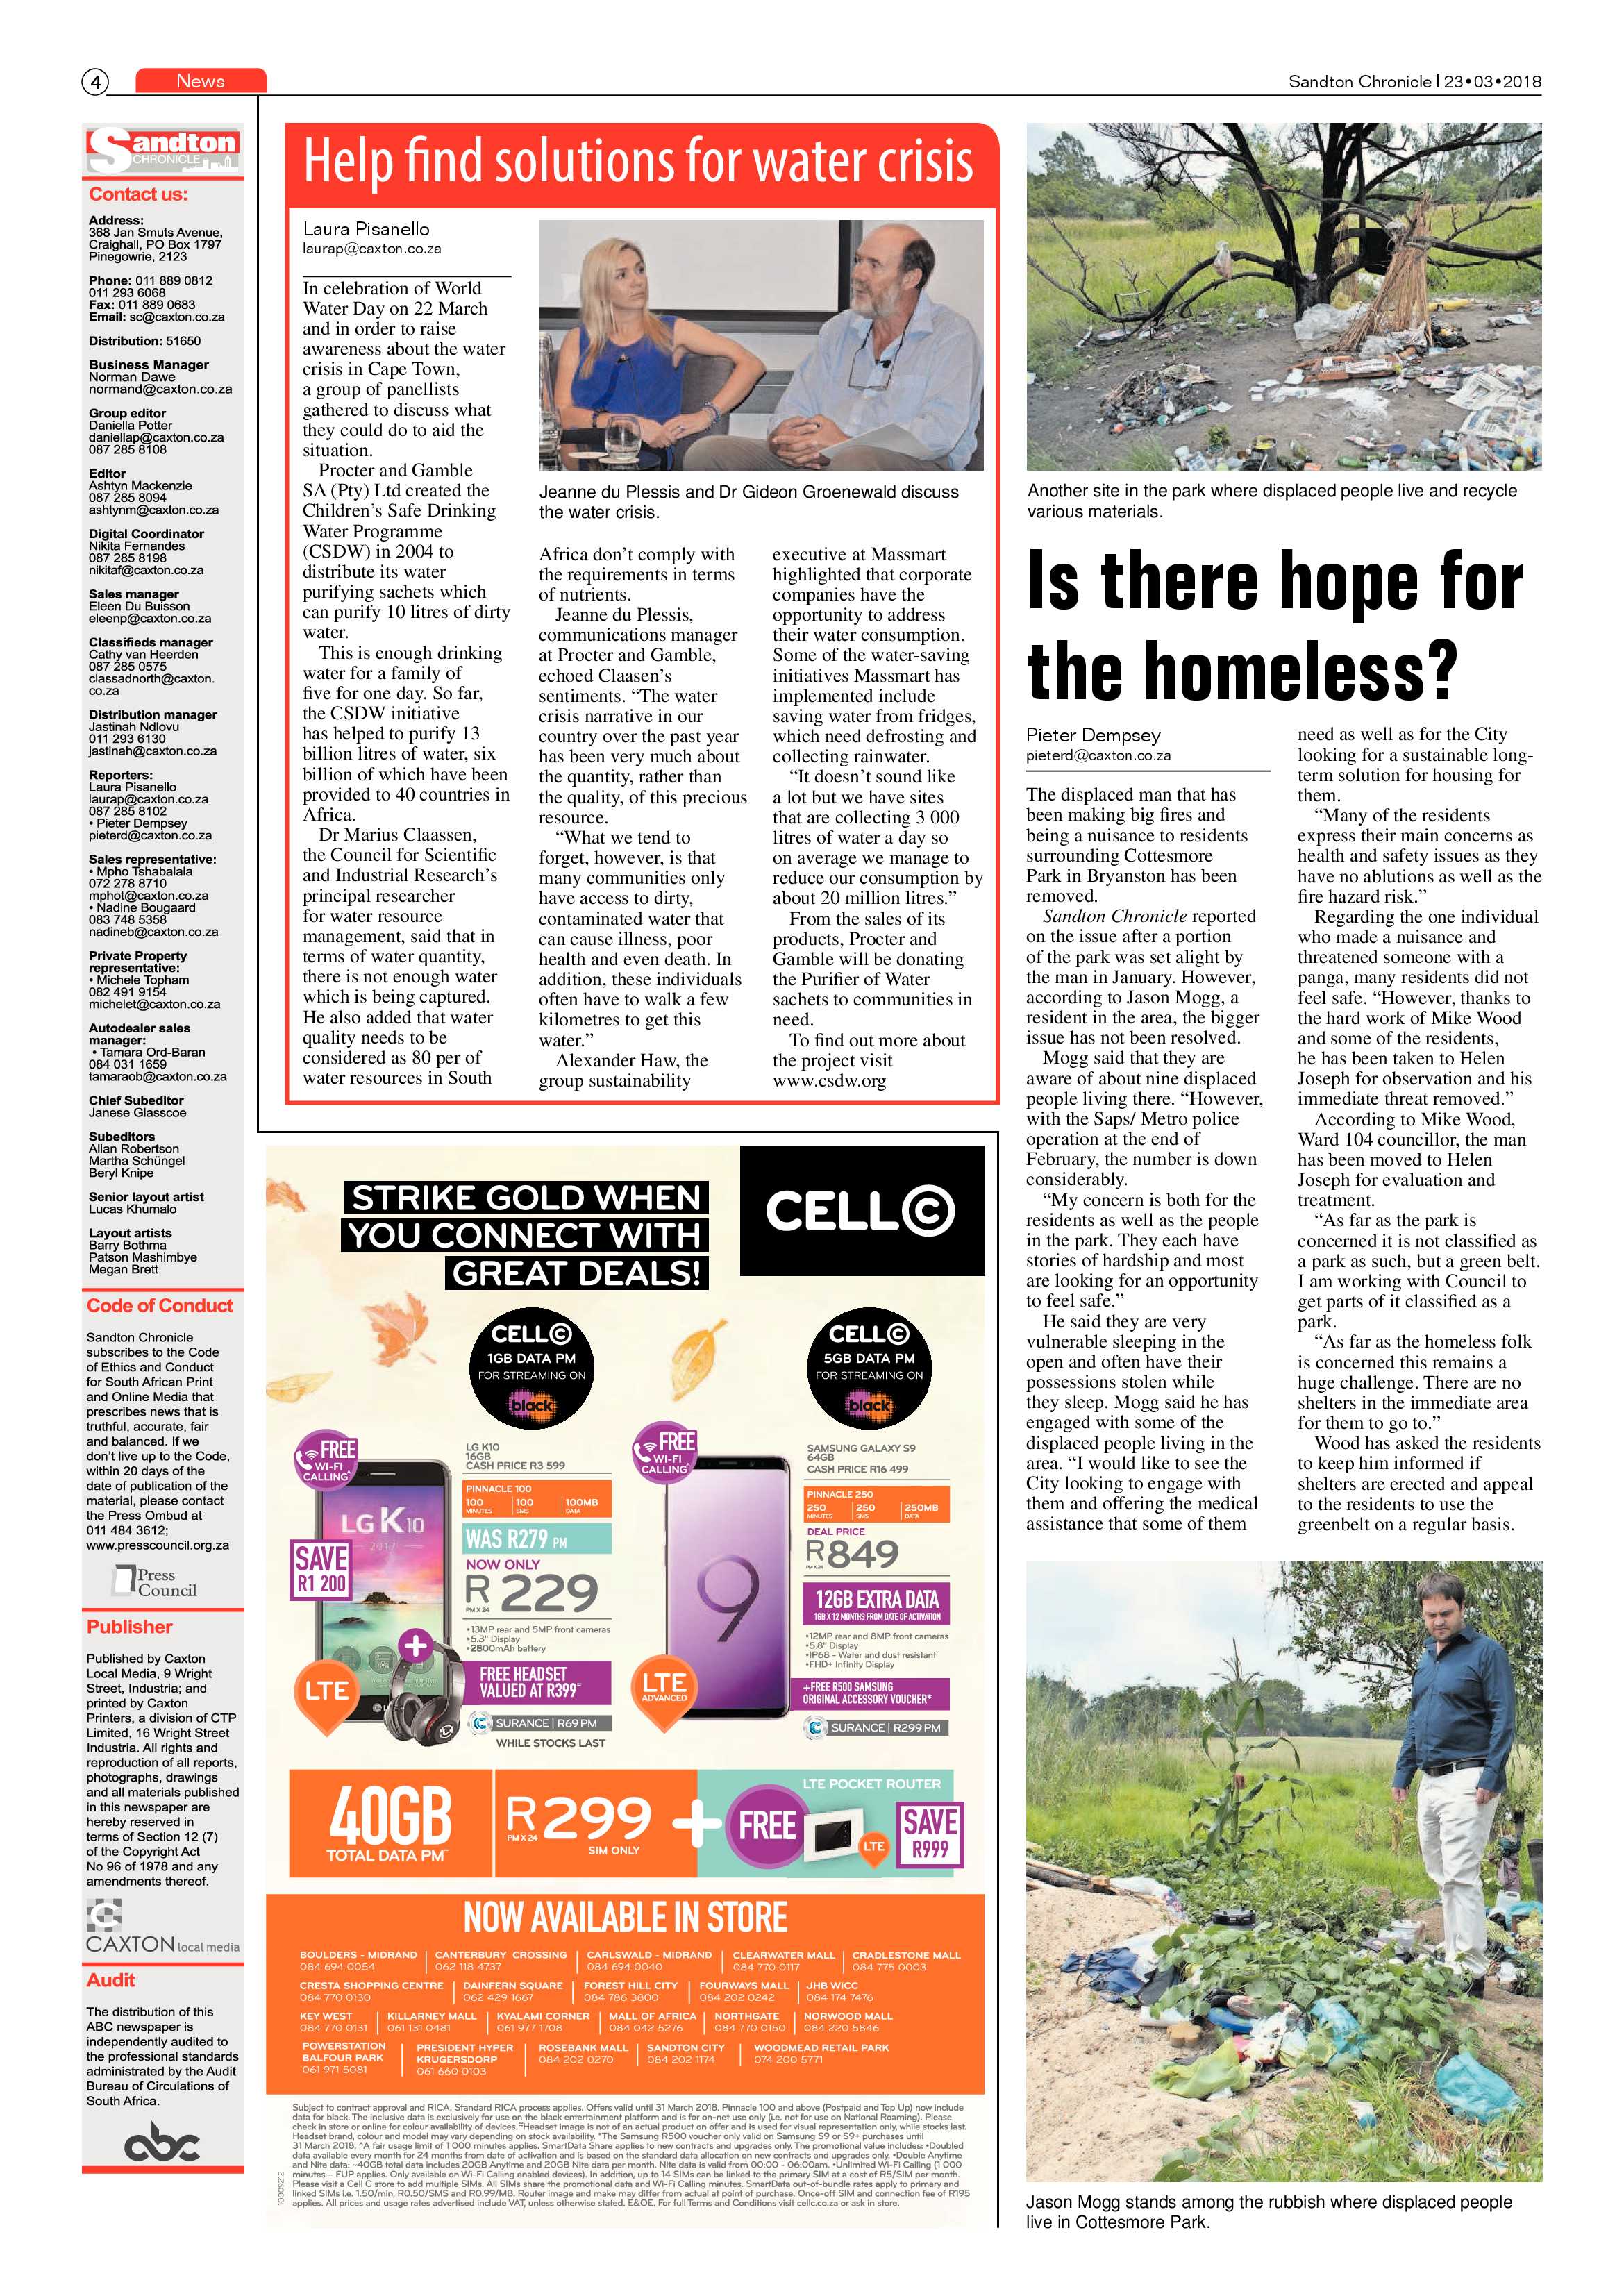 Sandton Chronicle 23 March 2018 page 4